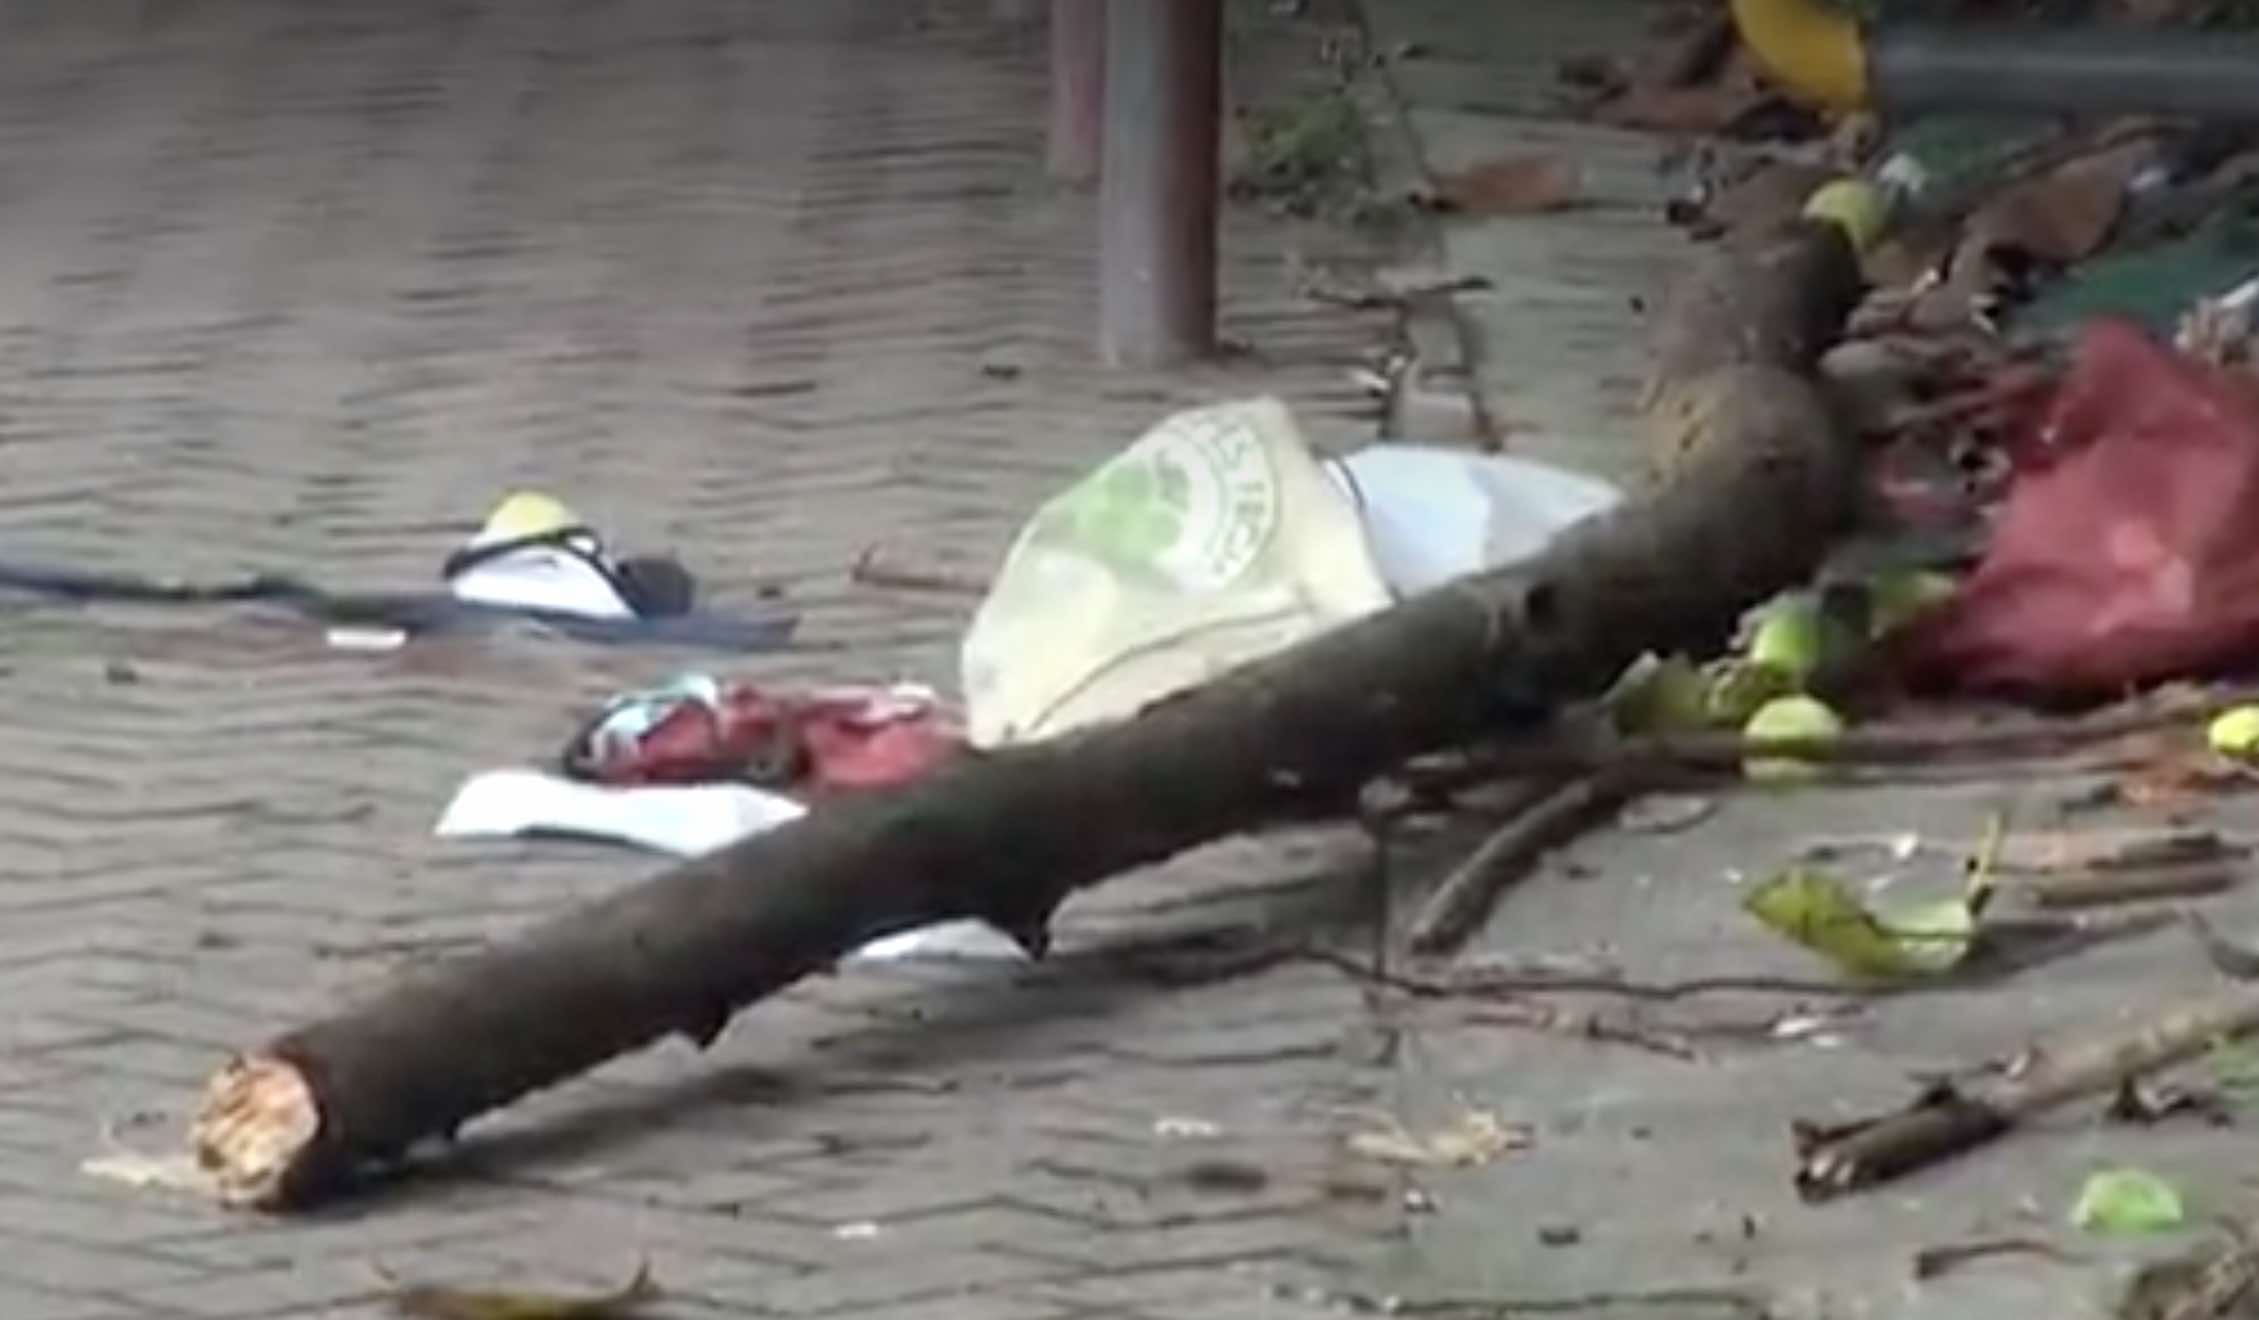 A picture of the branch which killed a 48-year-old woman. Via Apple Daily video (screen grab)